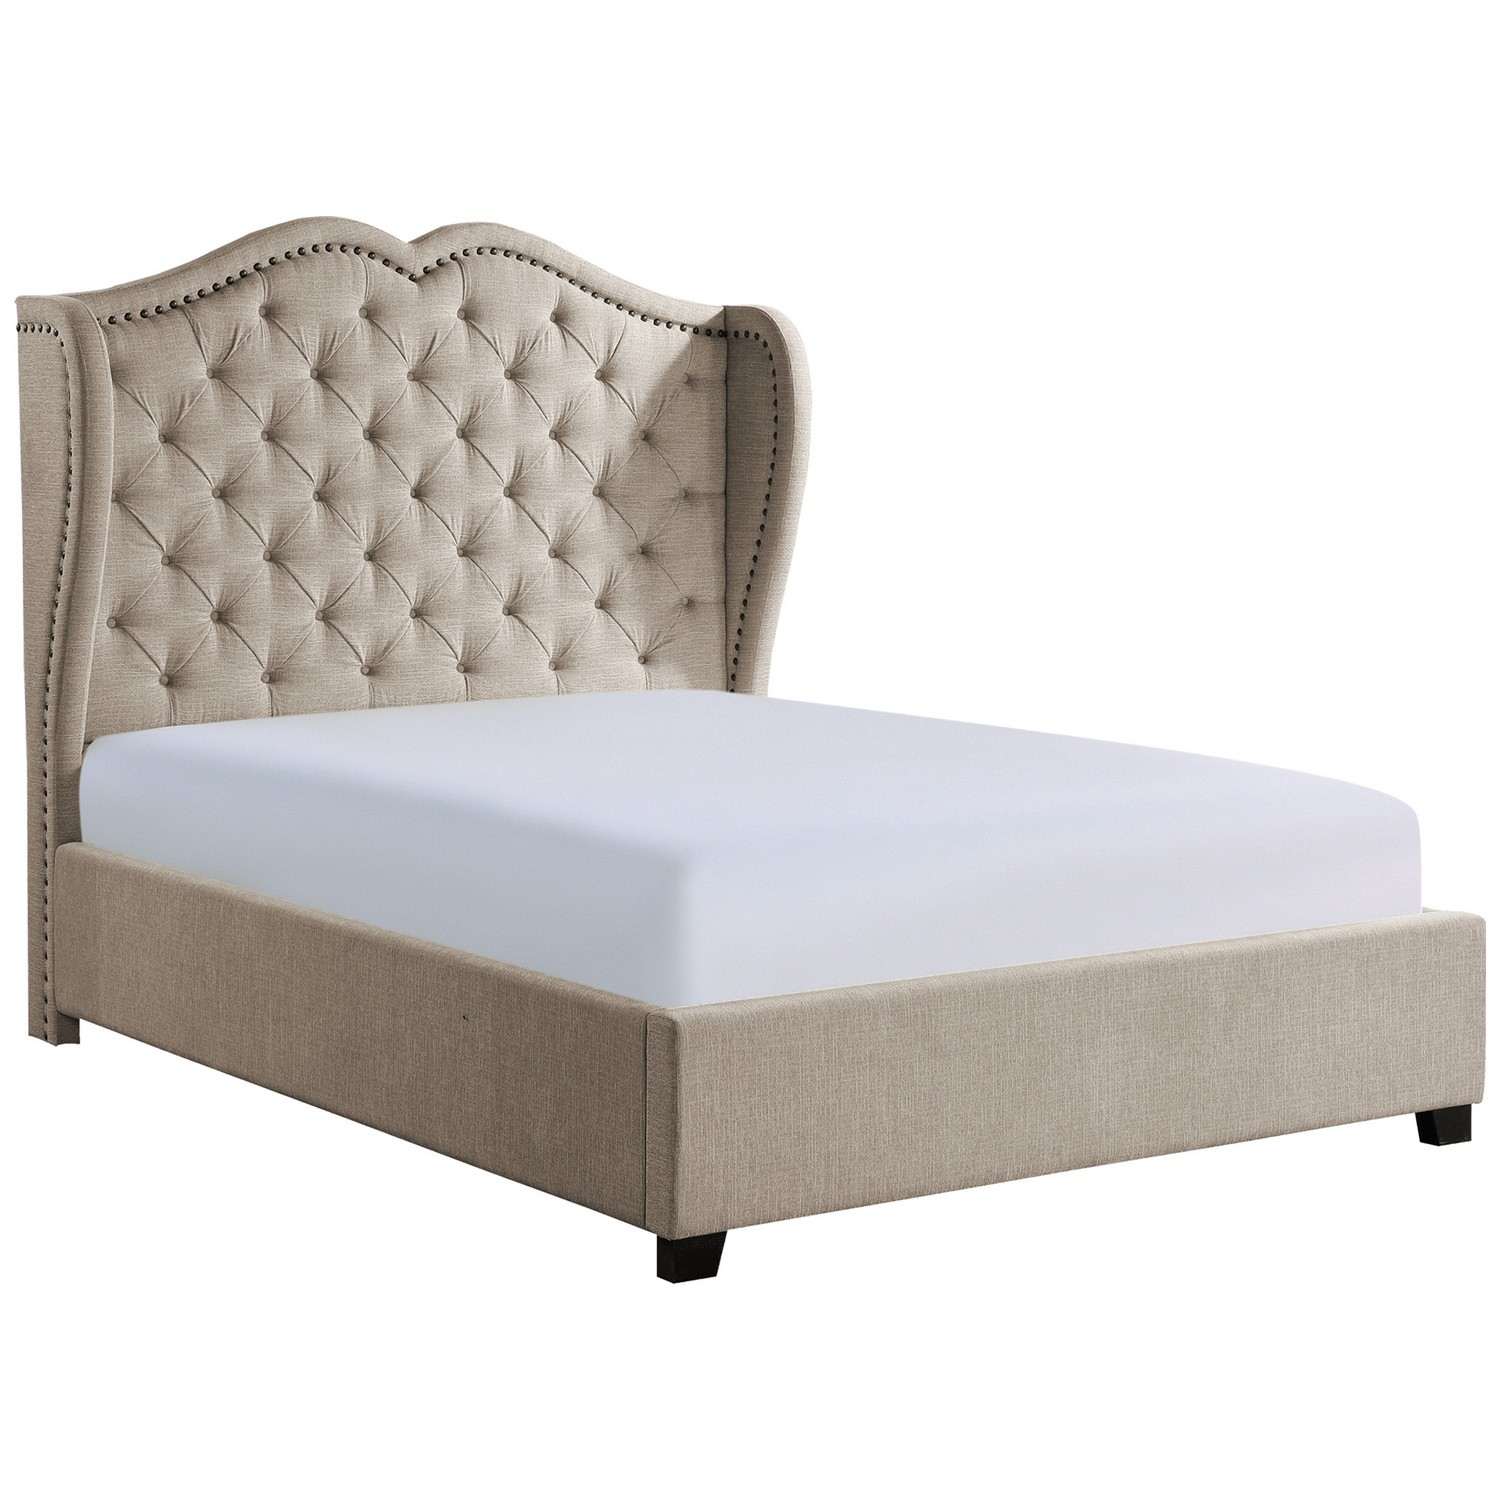 Homelegance Waterlyn Tufted Bed - Neutral Toned